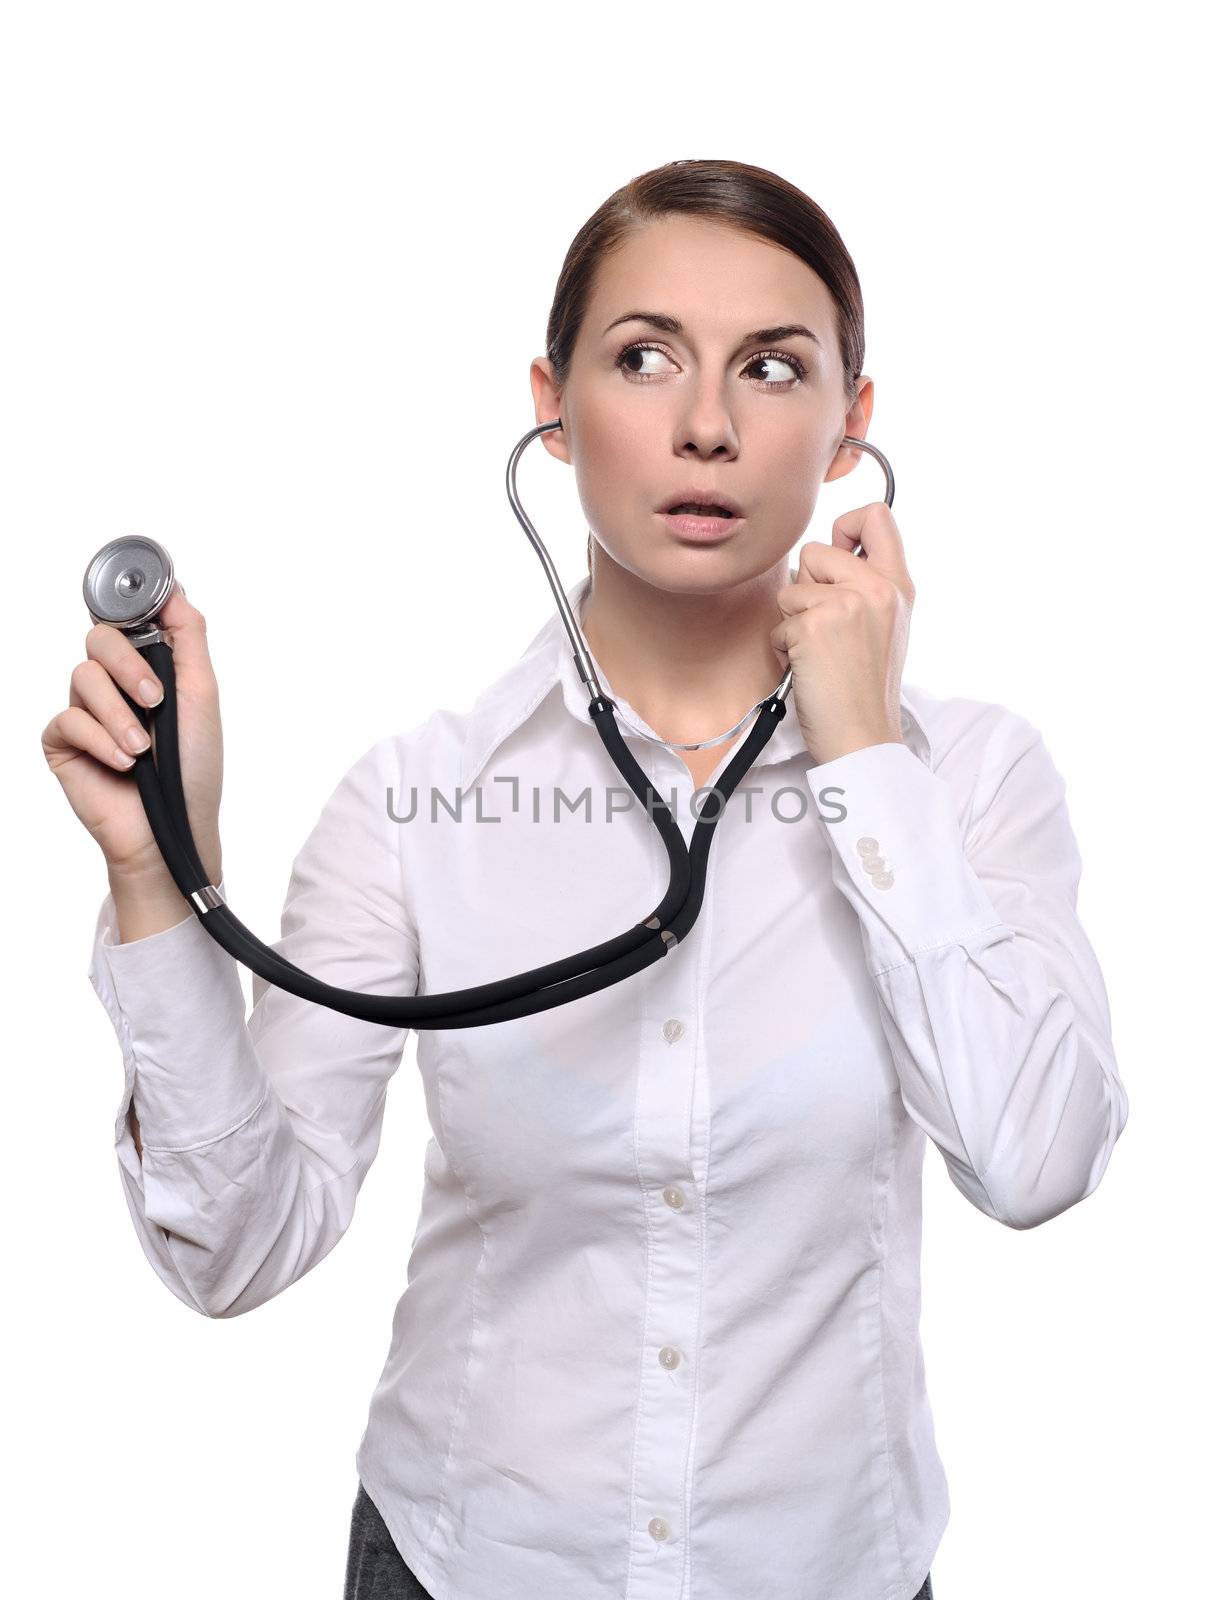 Female doctor listen with a stethoscope isolated on white background